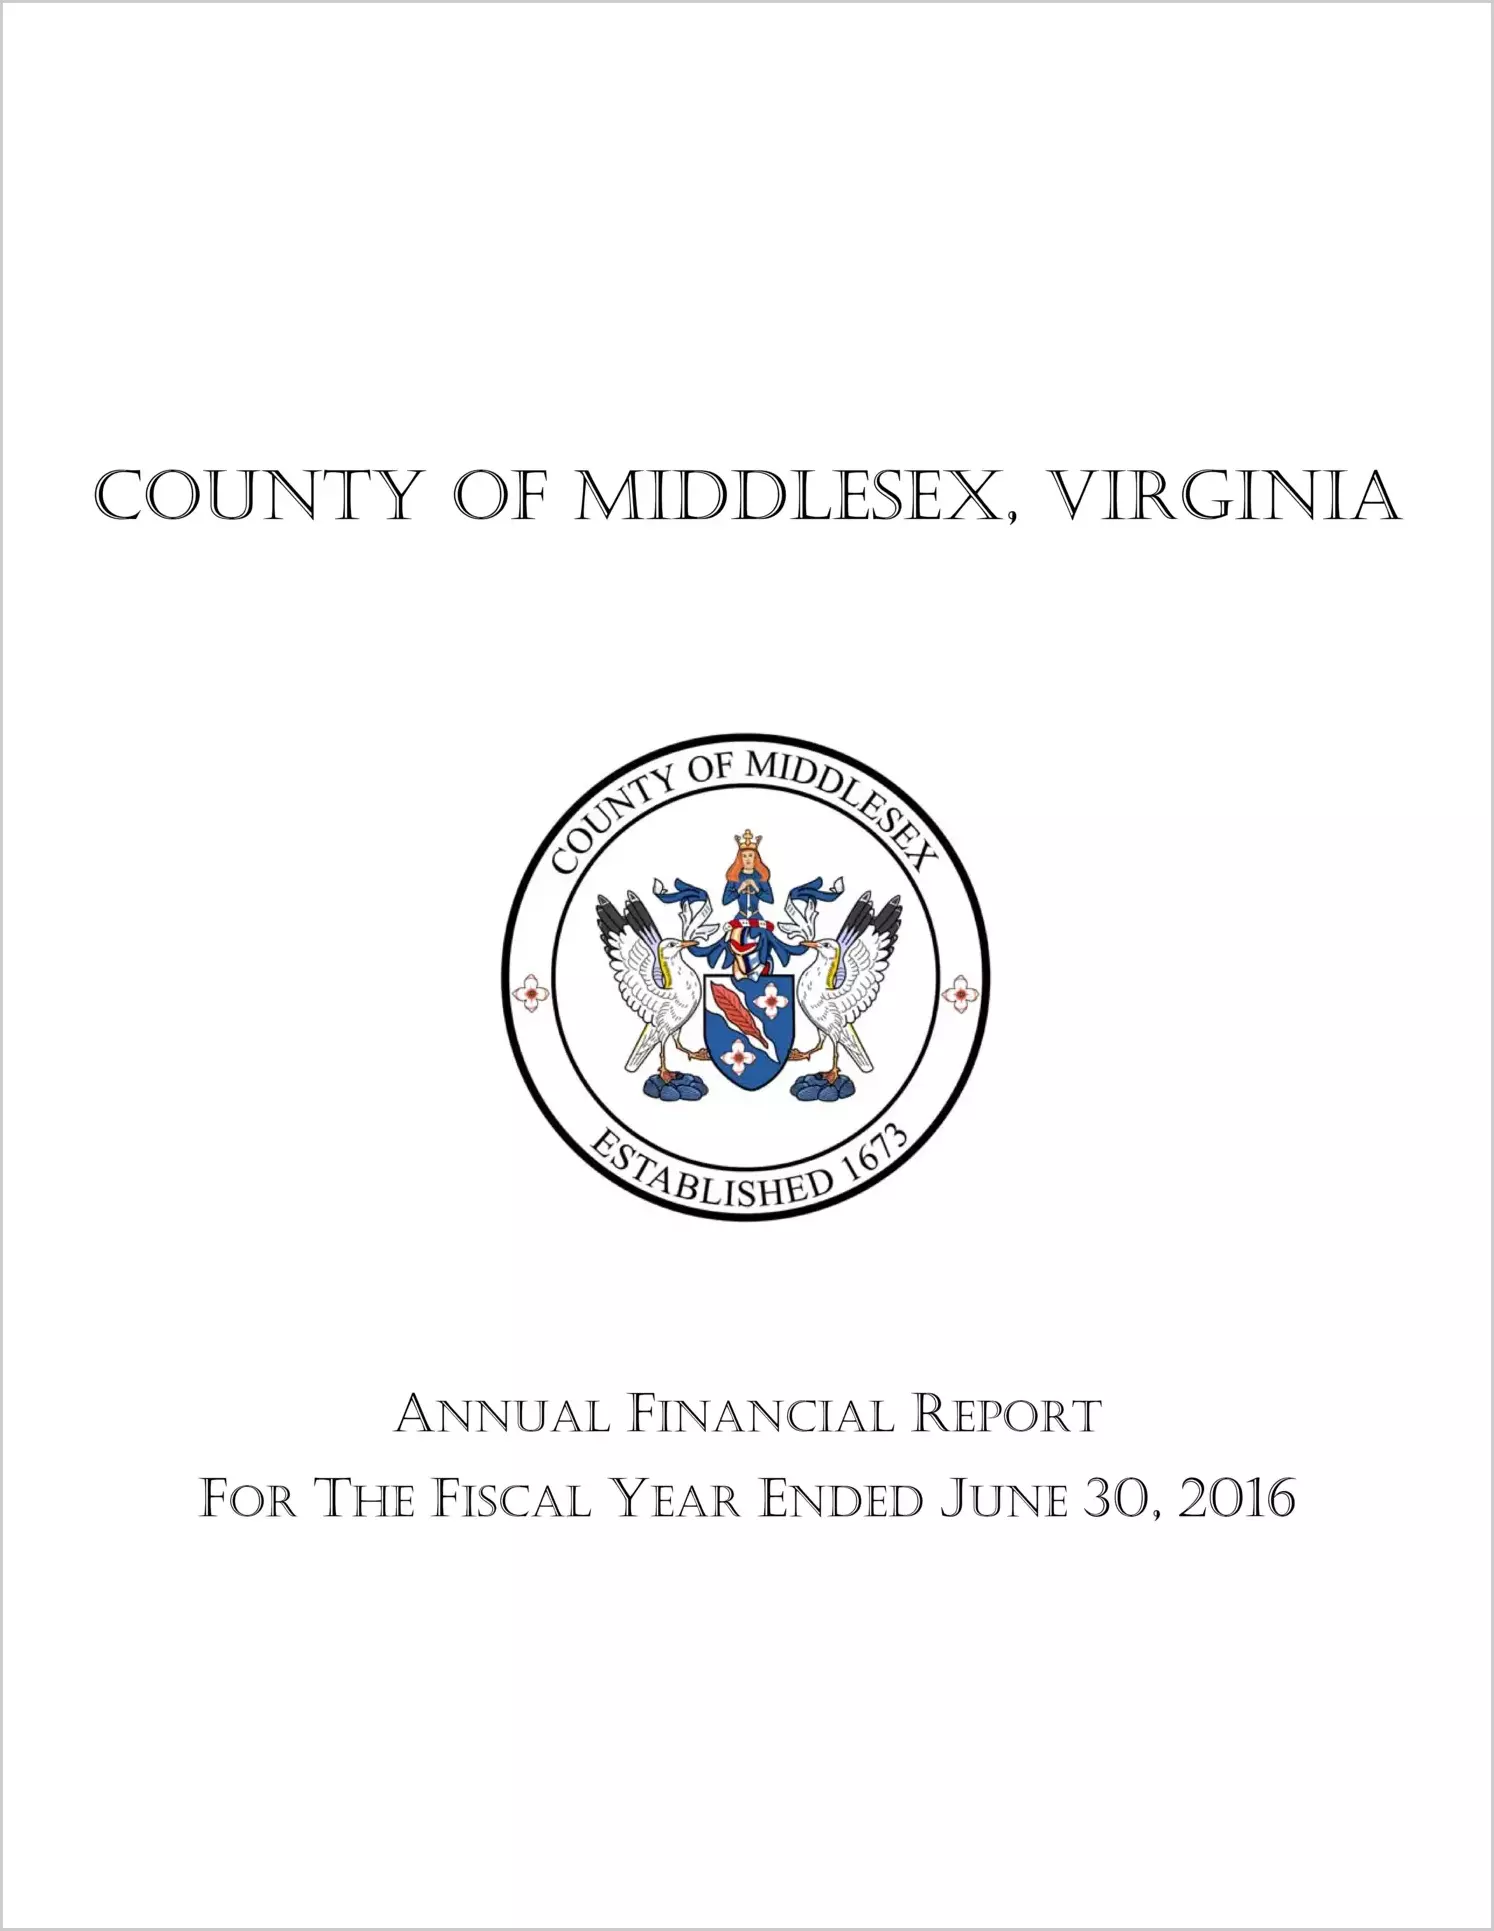 2016 Annual Financial Report for County of Middlesex